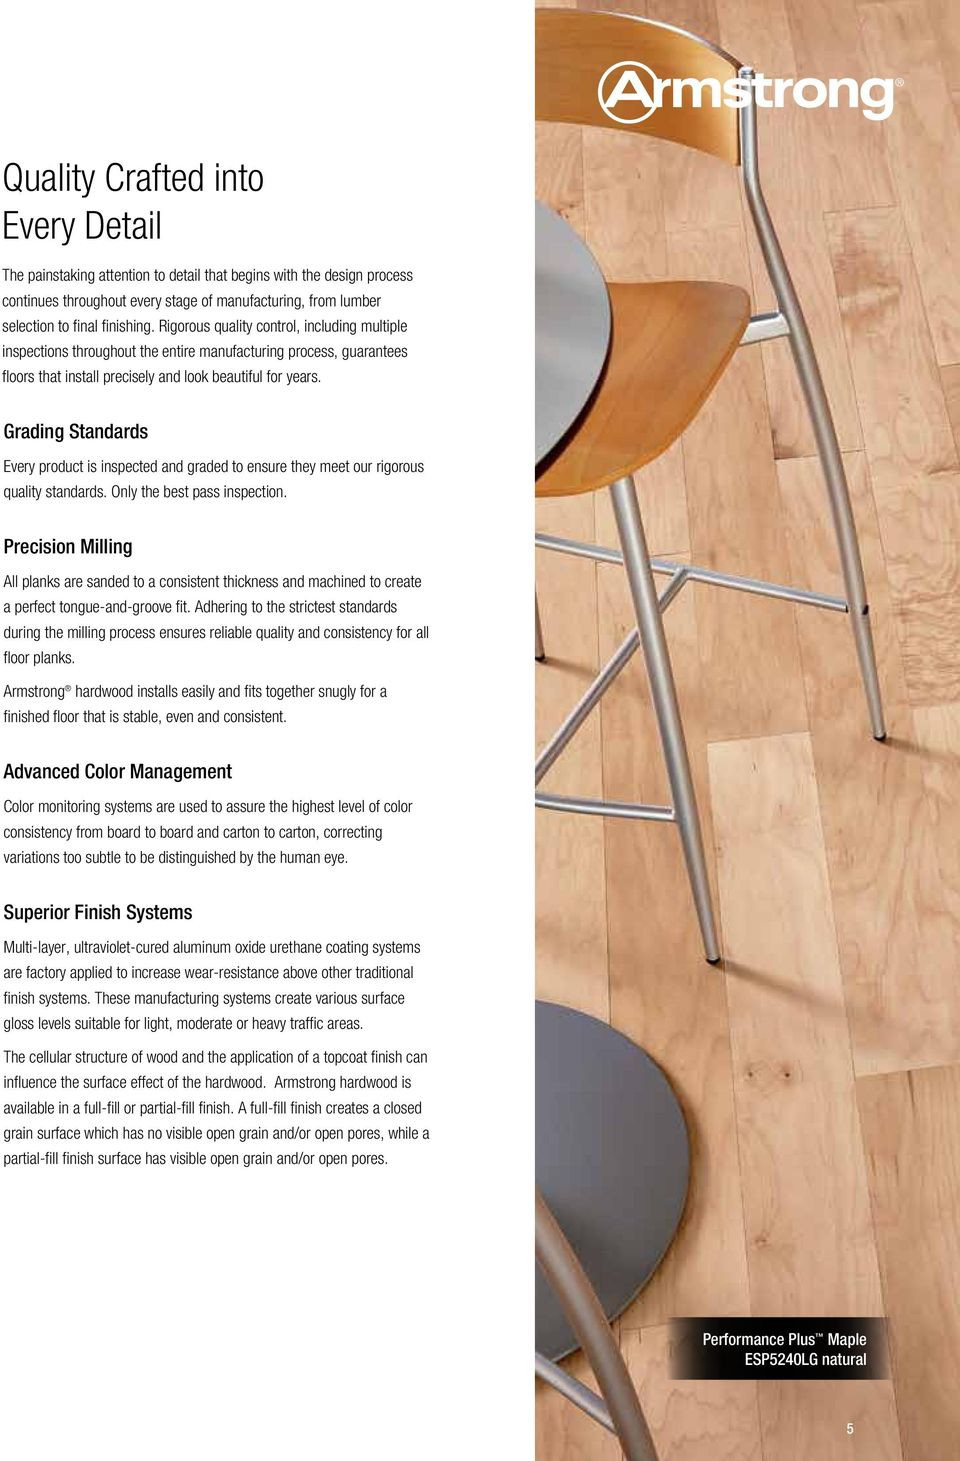 13 Best Armstrong Hardwood Laminate Floor Cleaner 2024 free download armstrong hardwood laminate floor cleaner of performance plus midtown pdf in grading standards every product is inspected and graded to ensure they meet our rigorous quality standards